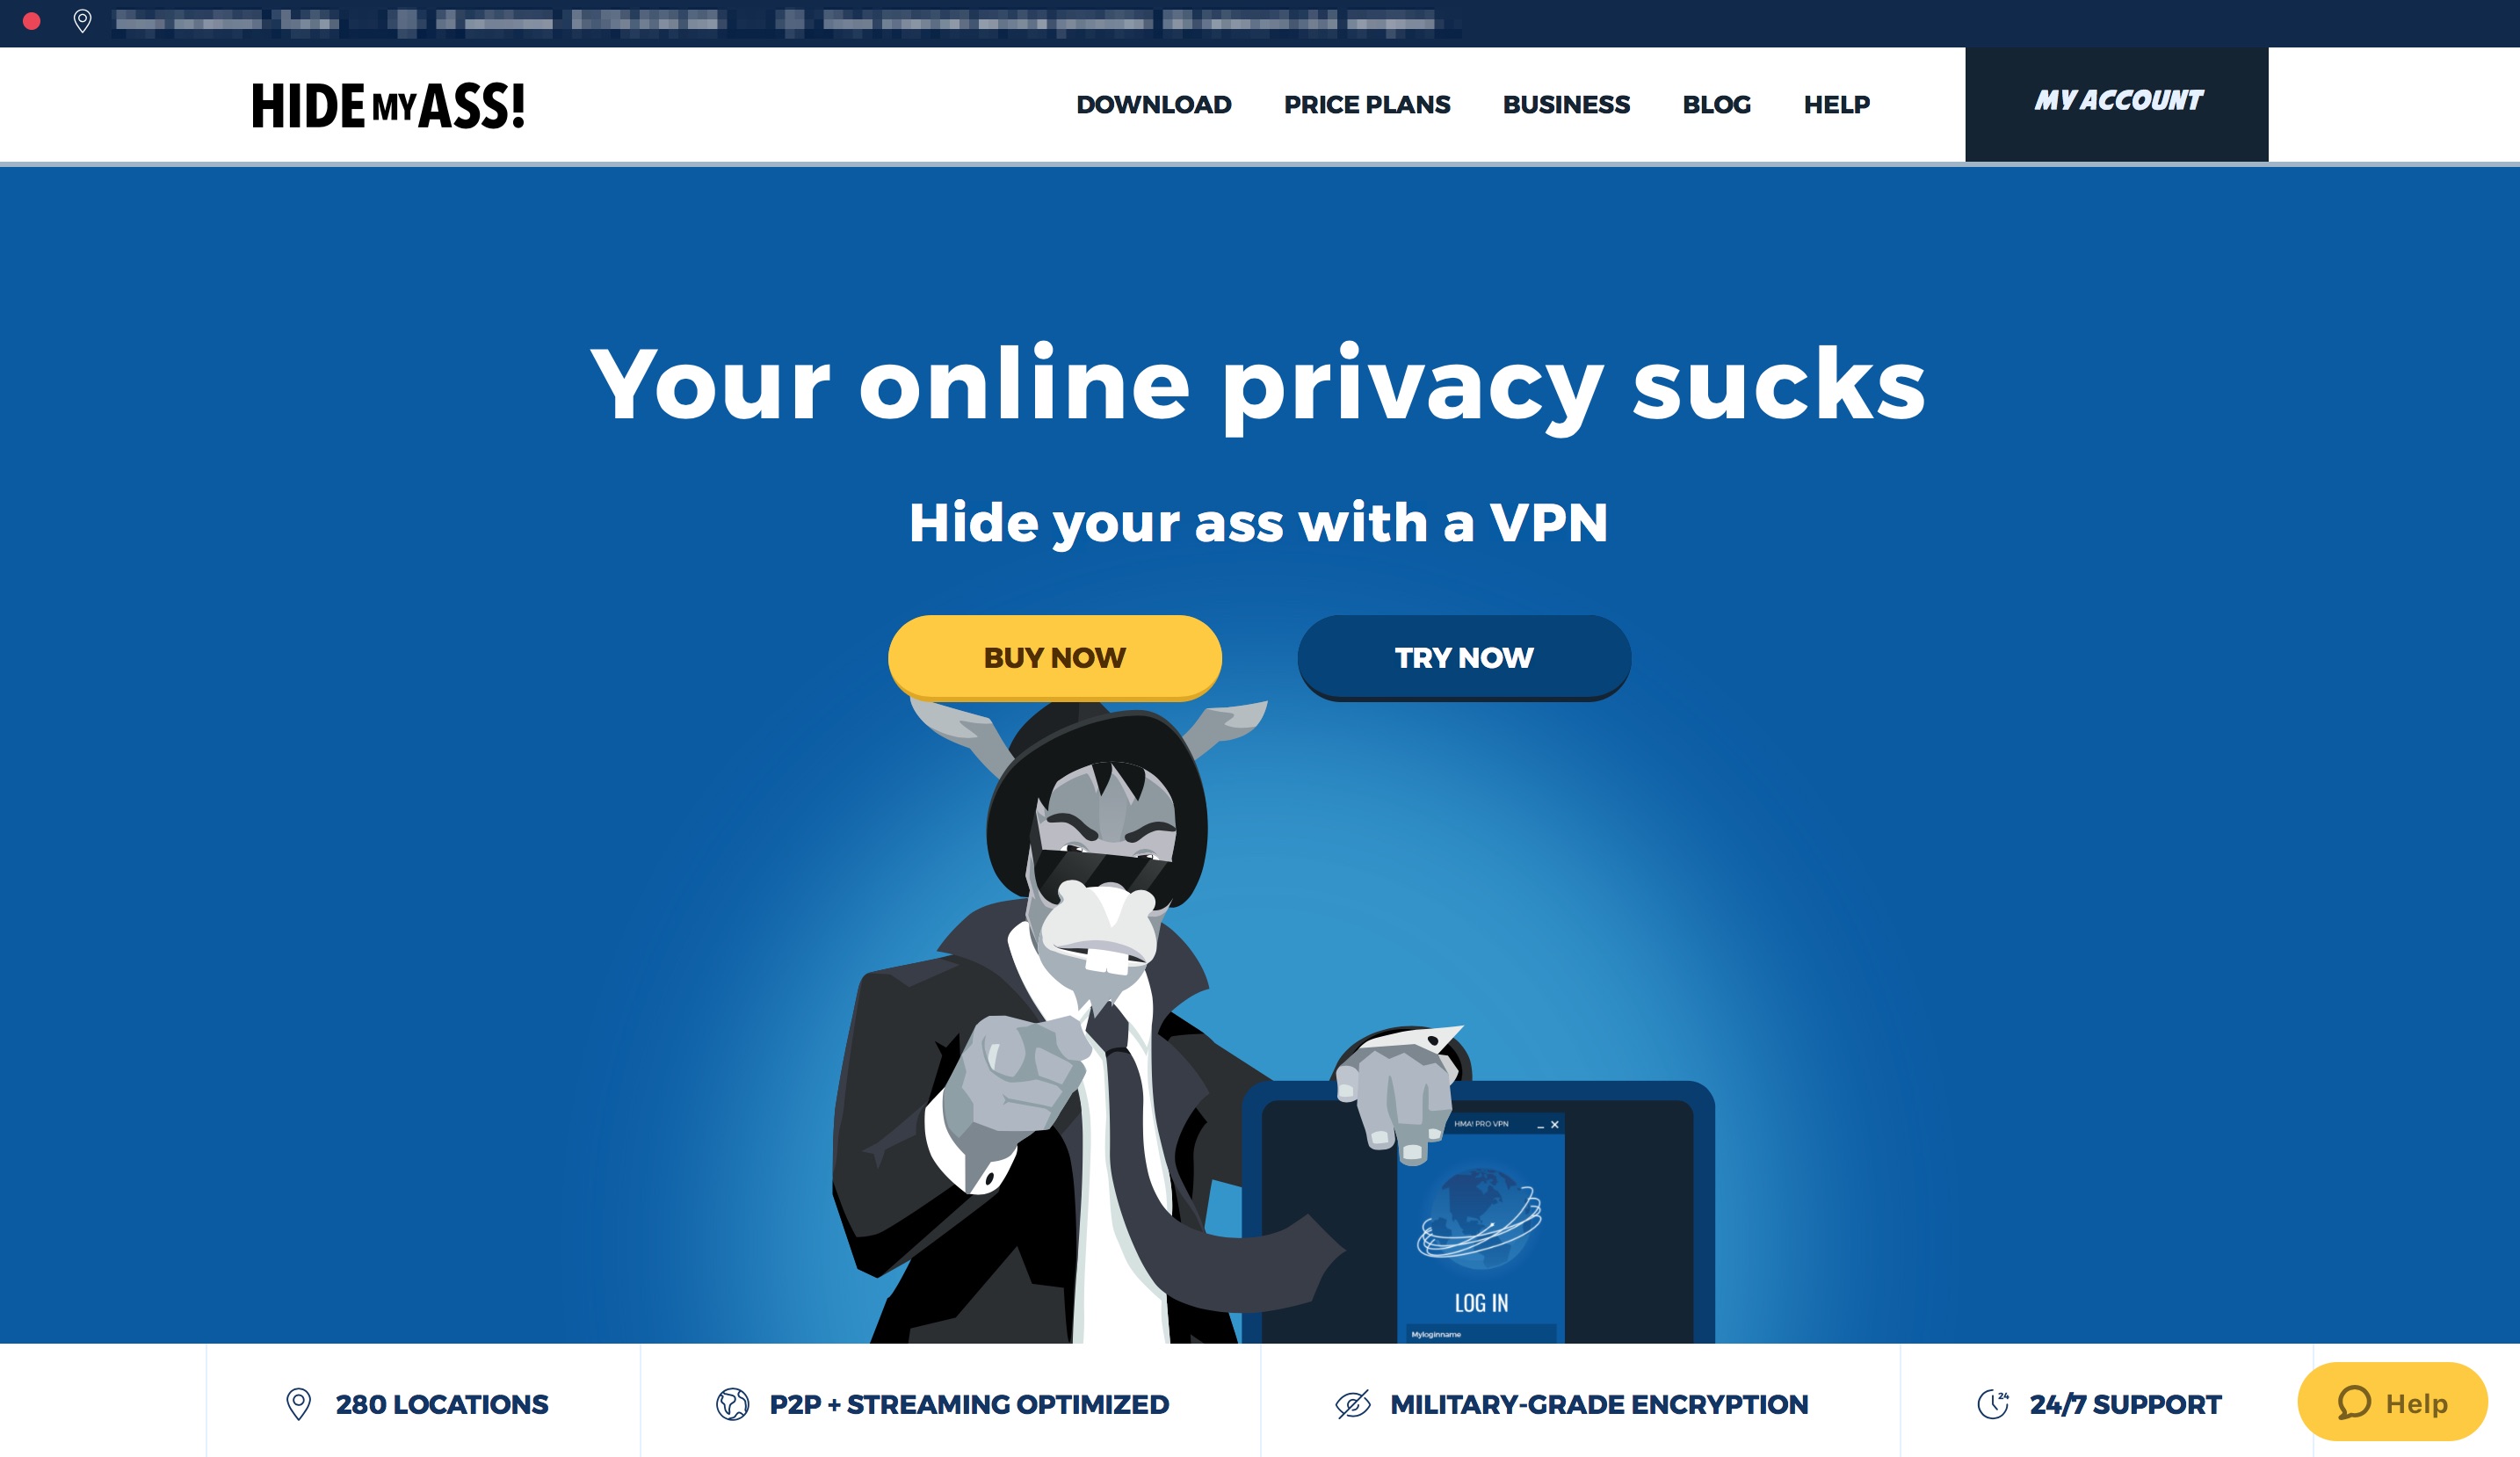 hma vpn coupons for home